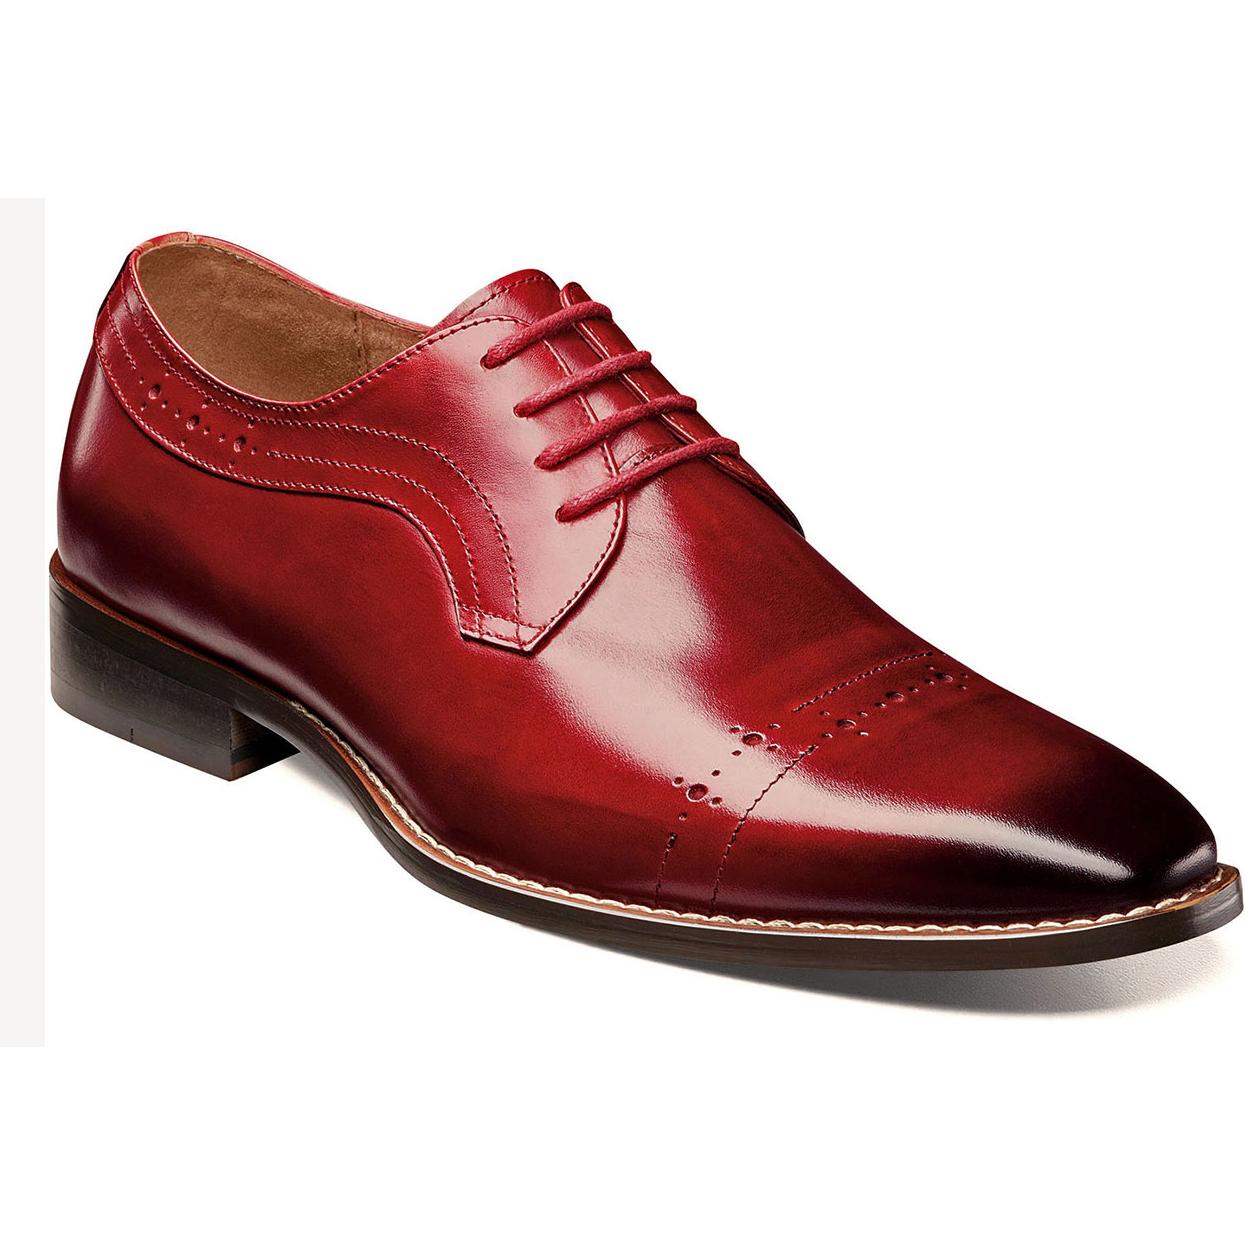 Stacy Adams Shallon Red Genuine Leather Cap-Toe Shoes 25236-600. - $104 ...